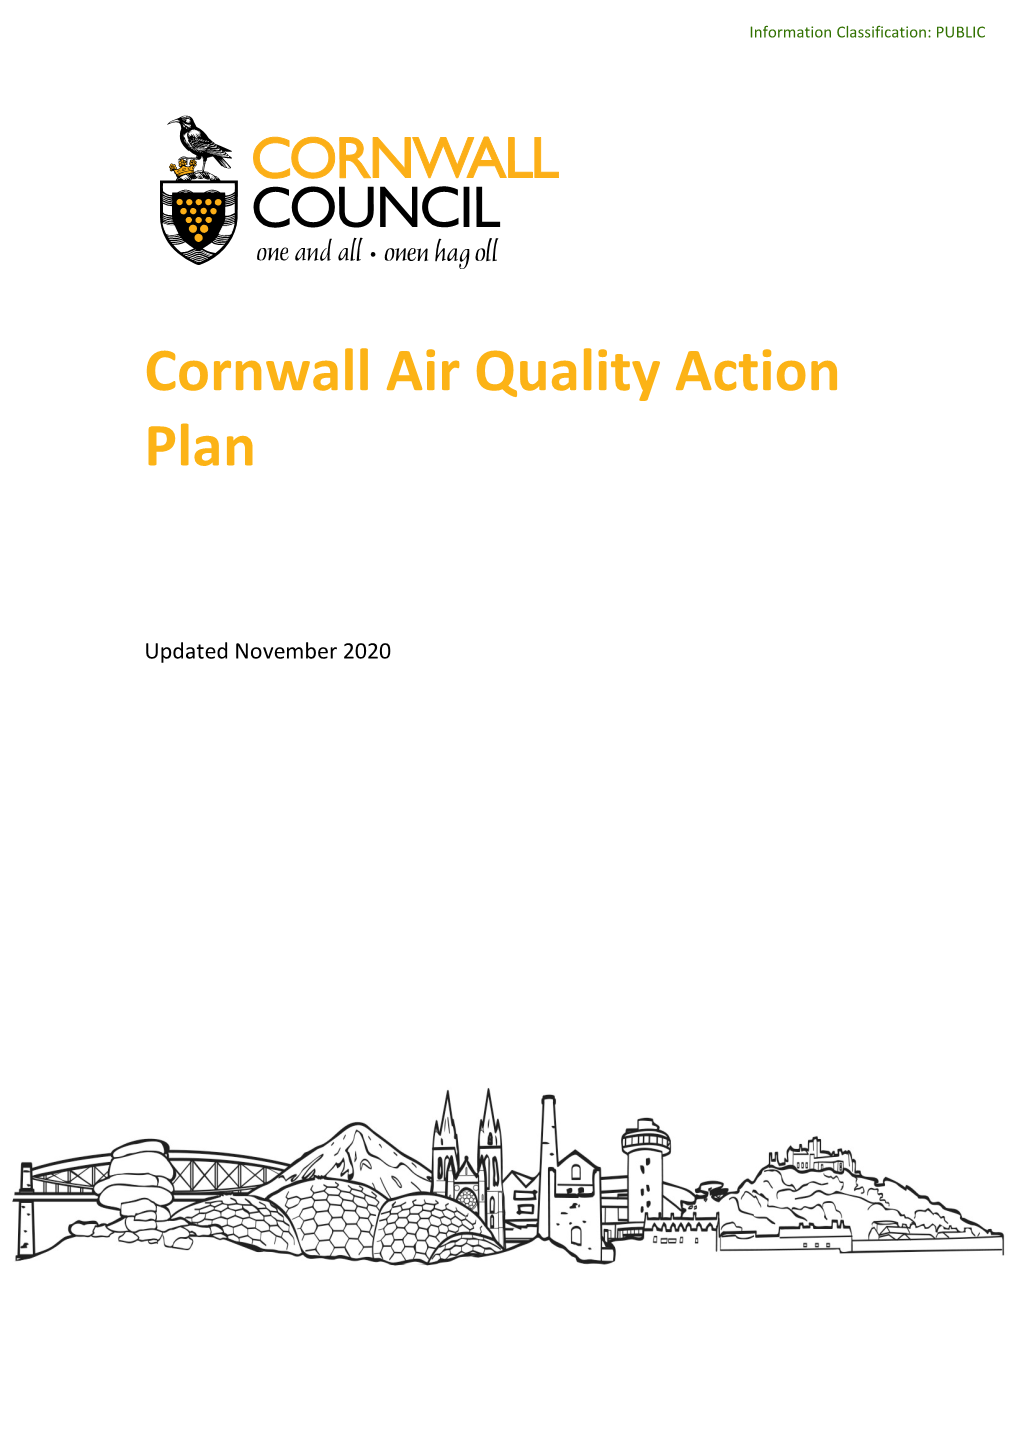 Air Quality Action Plan (AQAP) Within 12-18 Months Setting out Measures It Intends to Put in Place in Pursuit of the Objectives